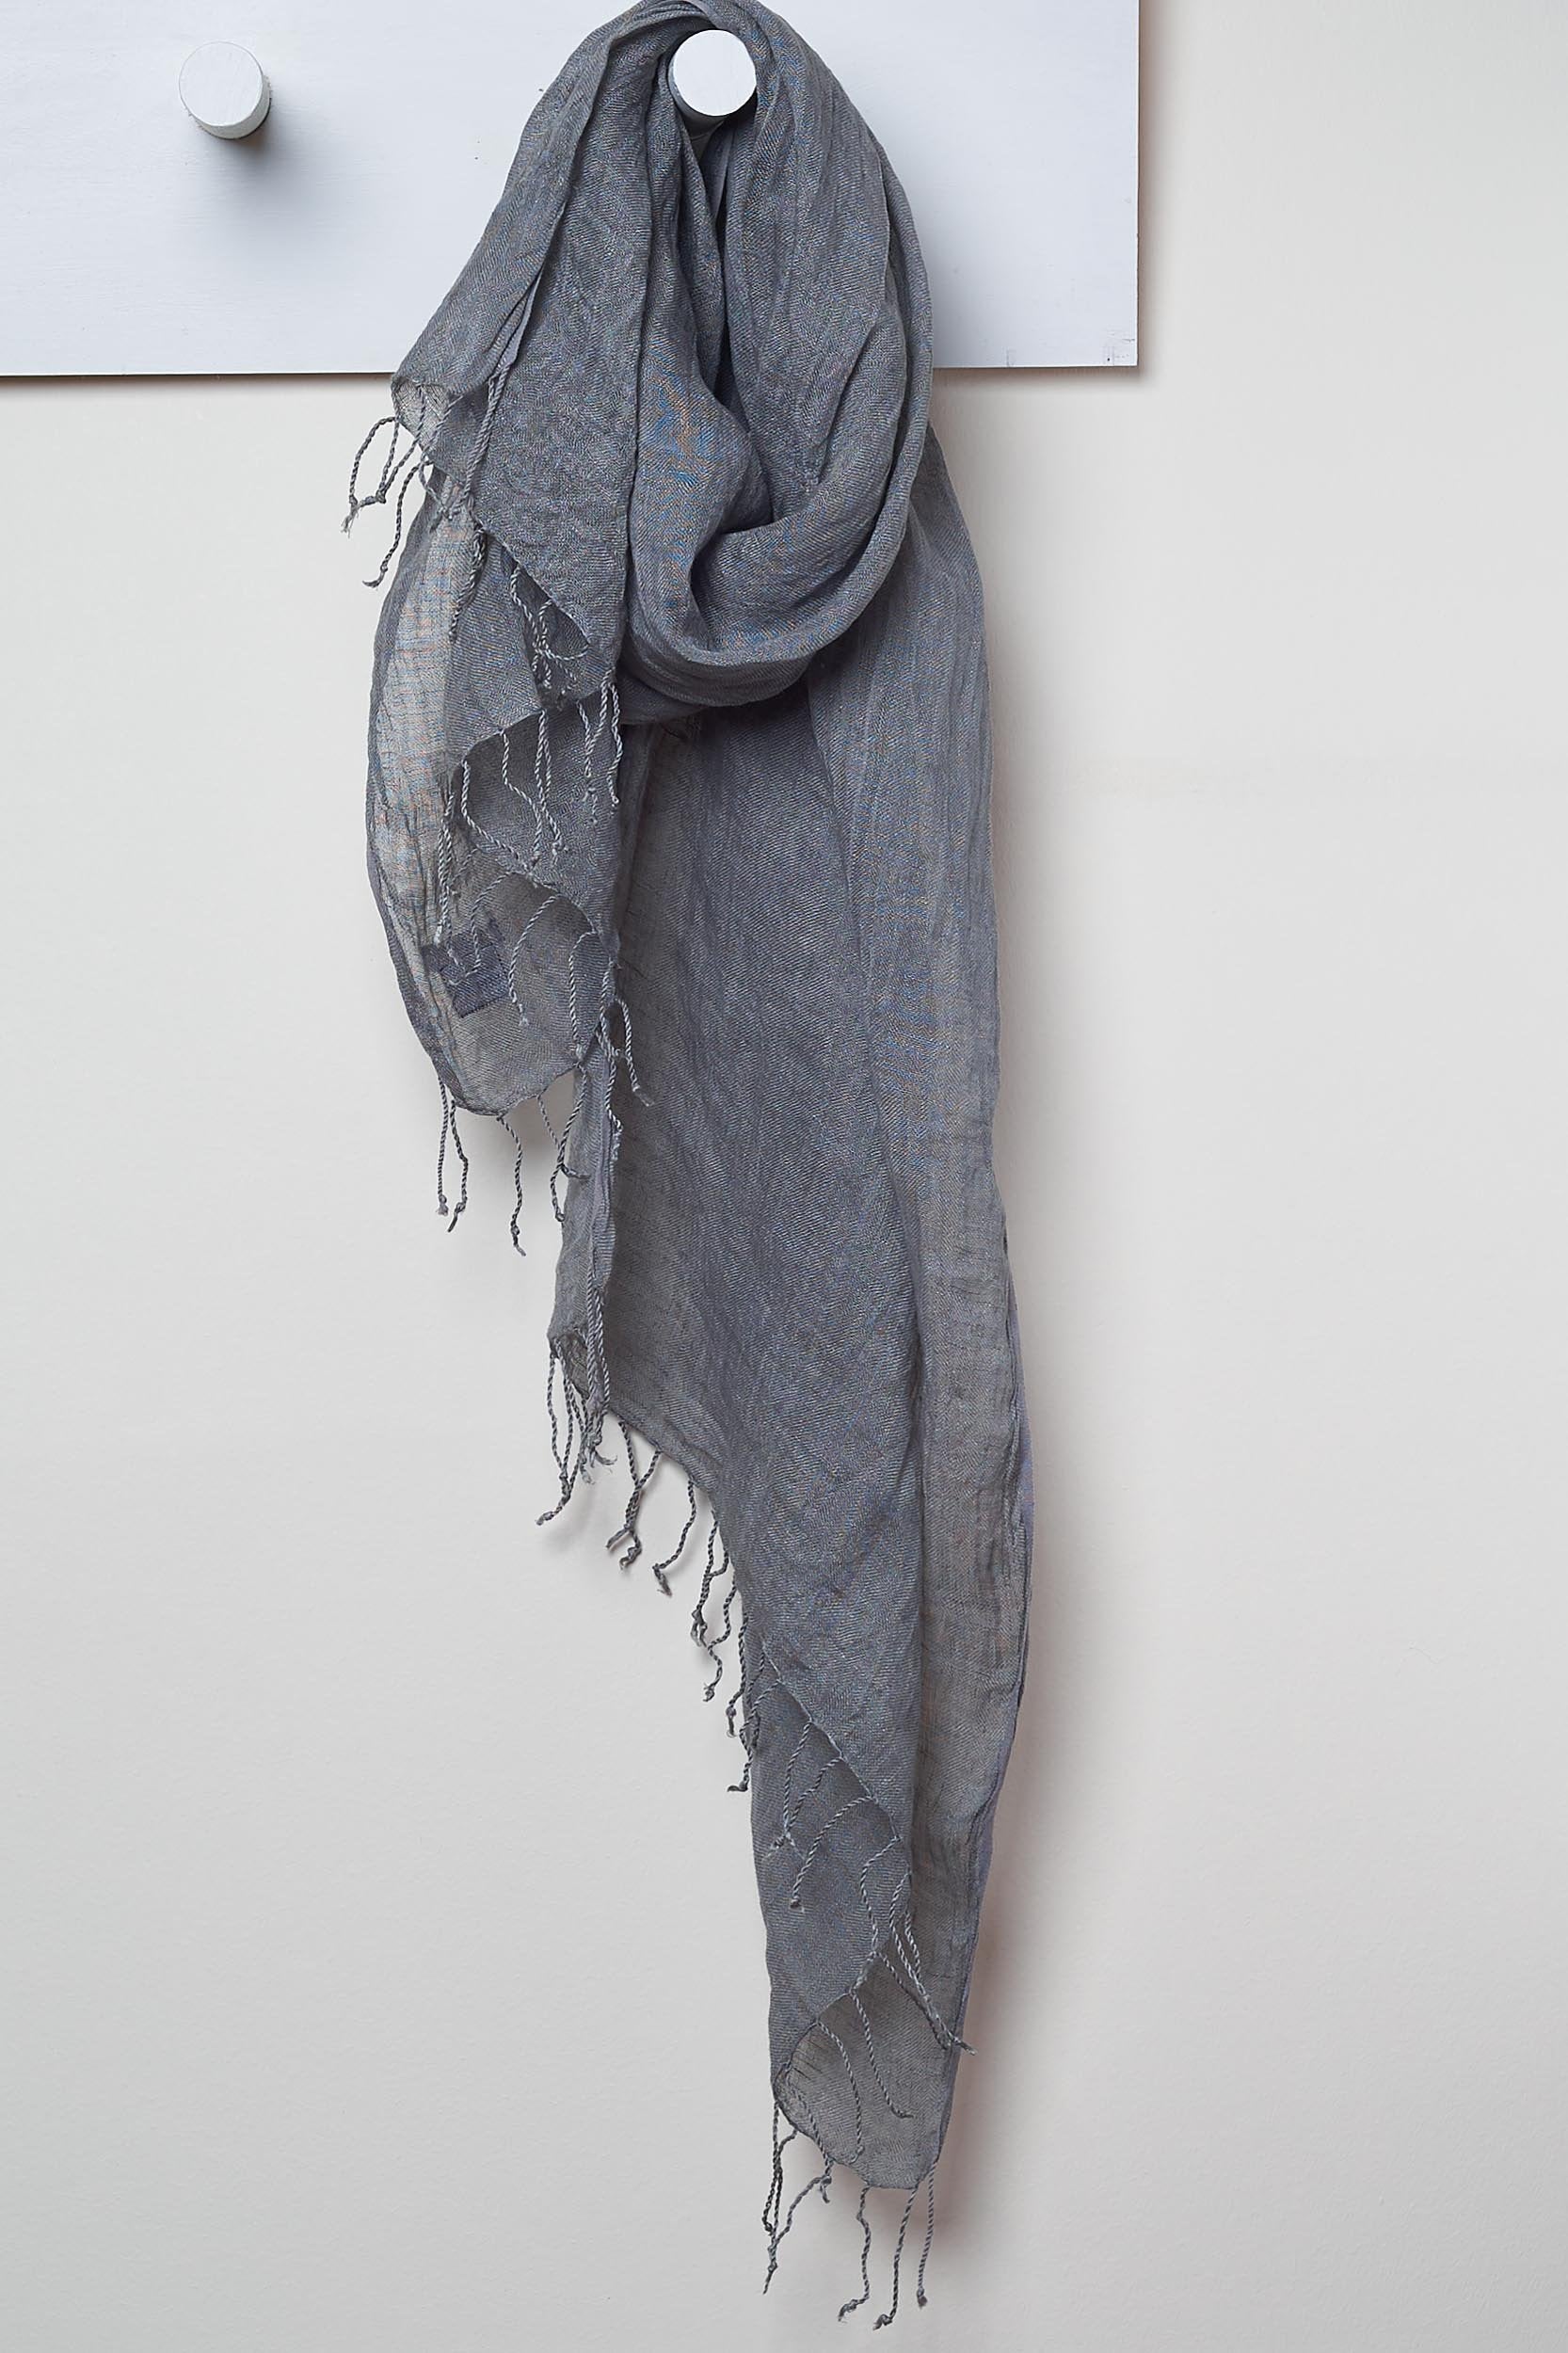 3 Visits To Cairo pure linen scarf in Charcoal. looped around a hook detailing the linen texture and thin tassels tied at the short edges of the scarf.